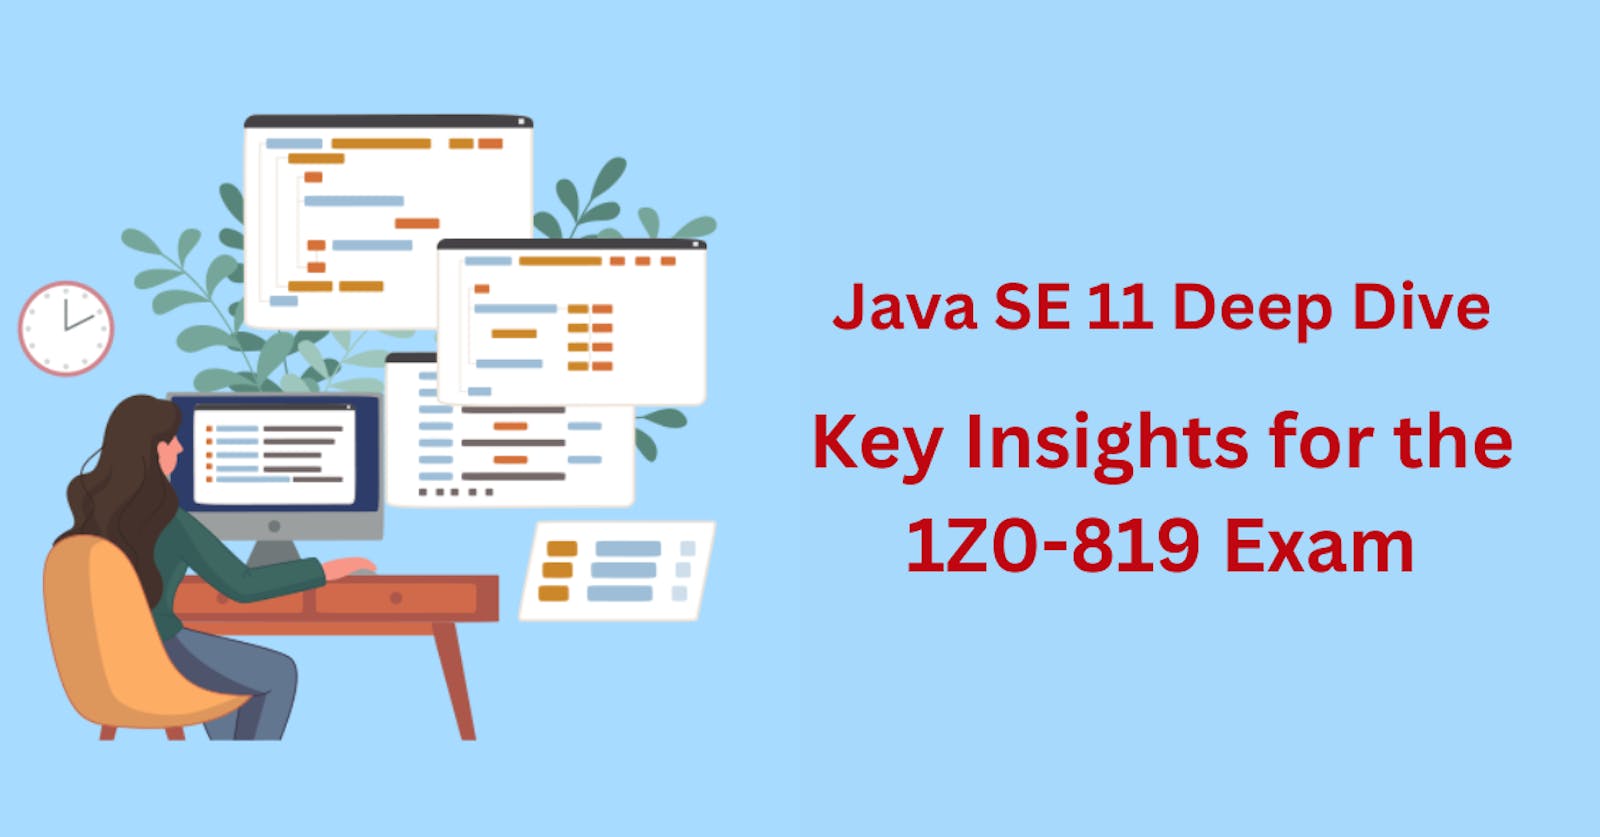 Java SE 11 New Features: What You Need to Know for the 1Z0-819 Exam